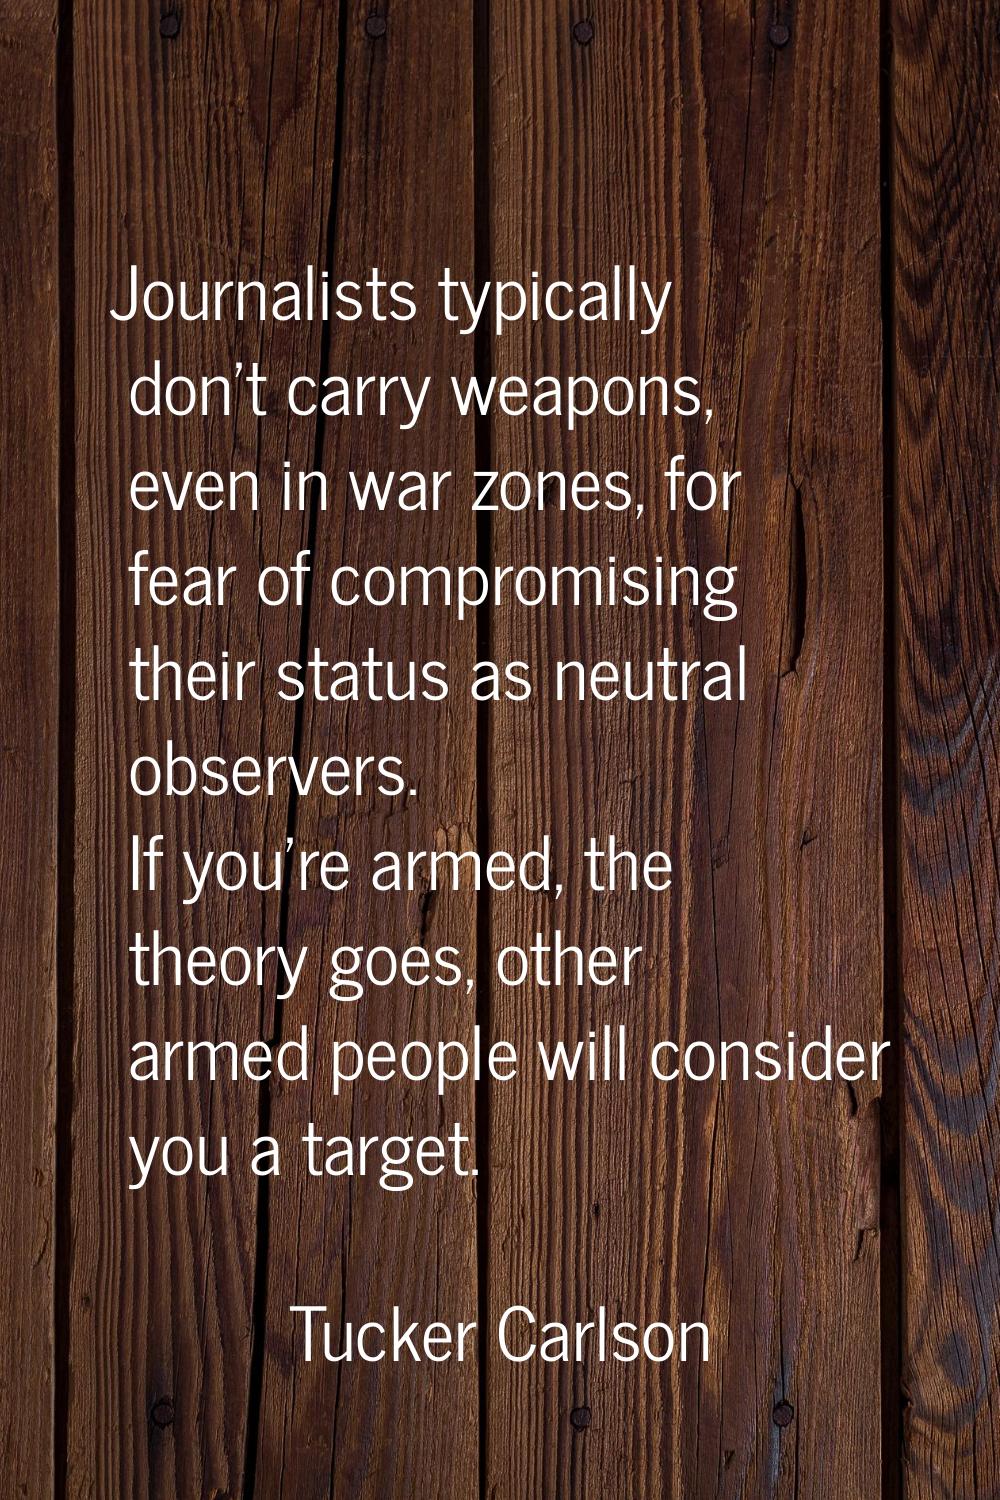 Journalists typically don't carry weapons, even in war zones, for fear of compromising their status